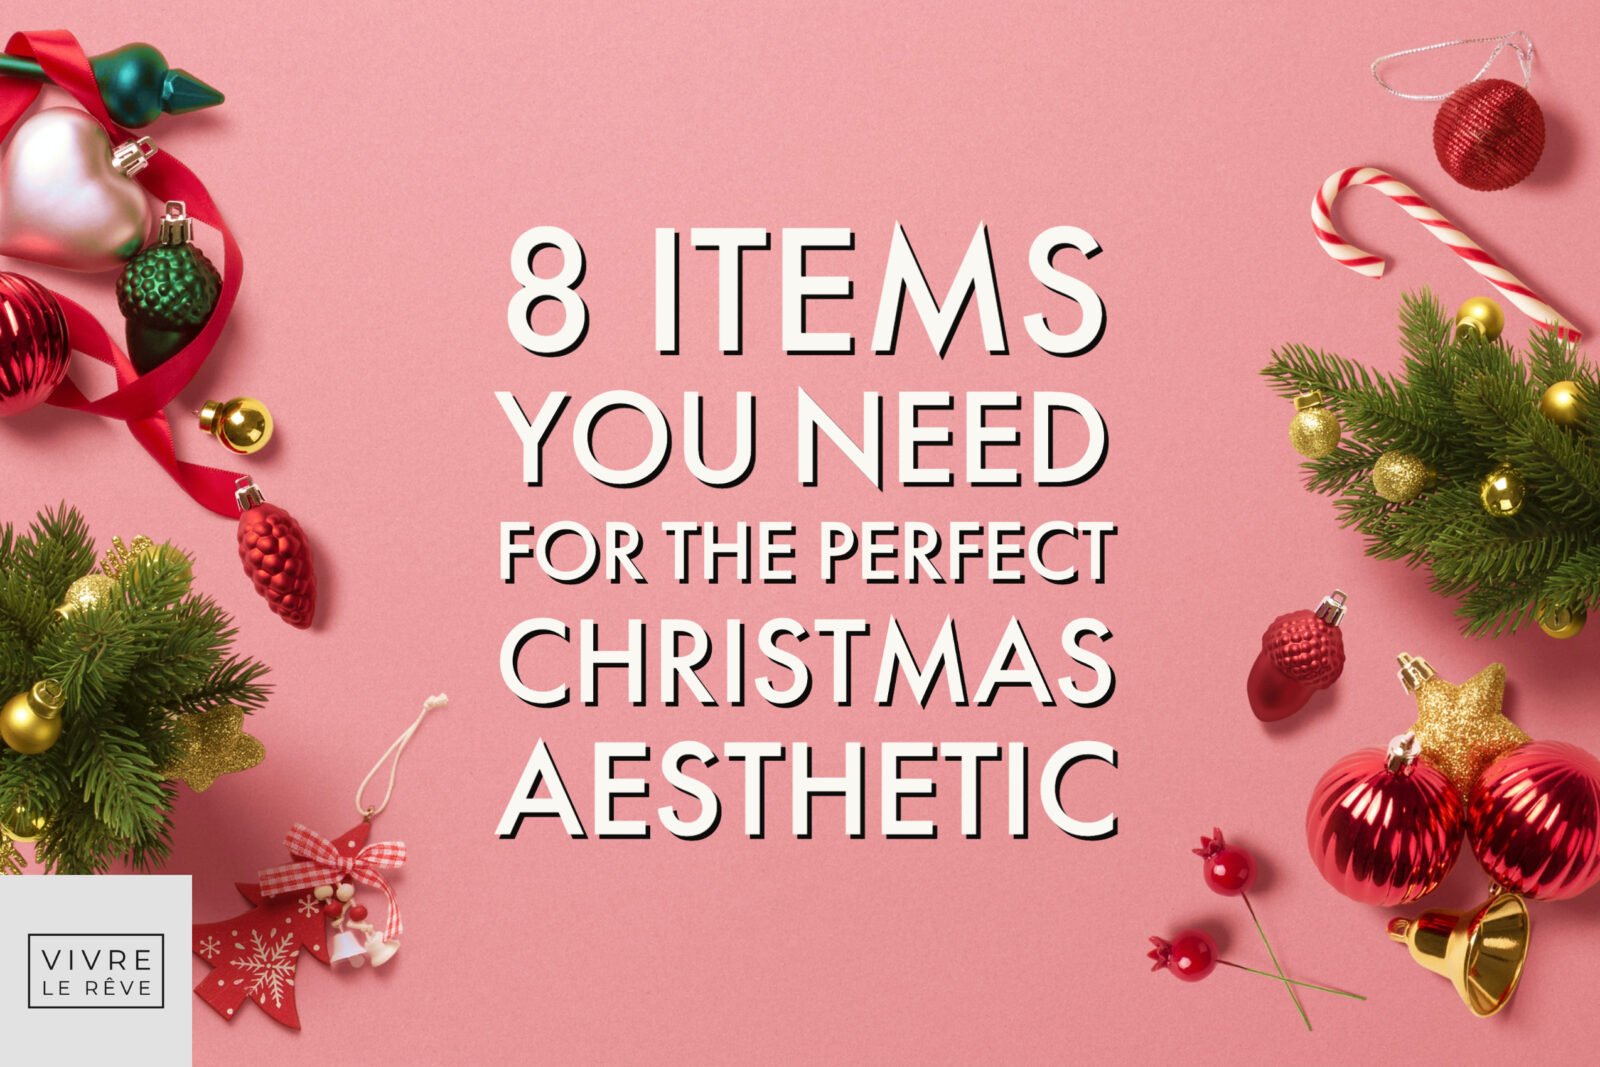 The Festive Season: 8 Items You Need for the Perfect Christmas Aesthetic